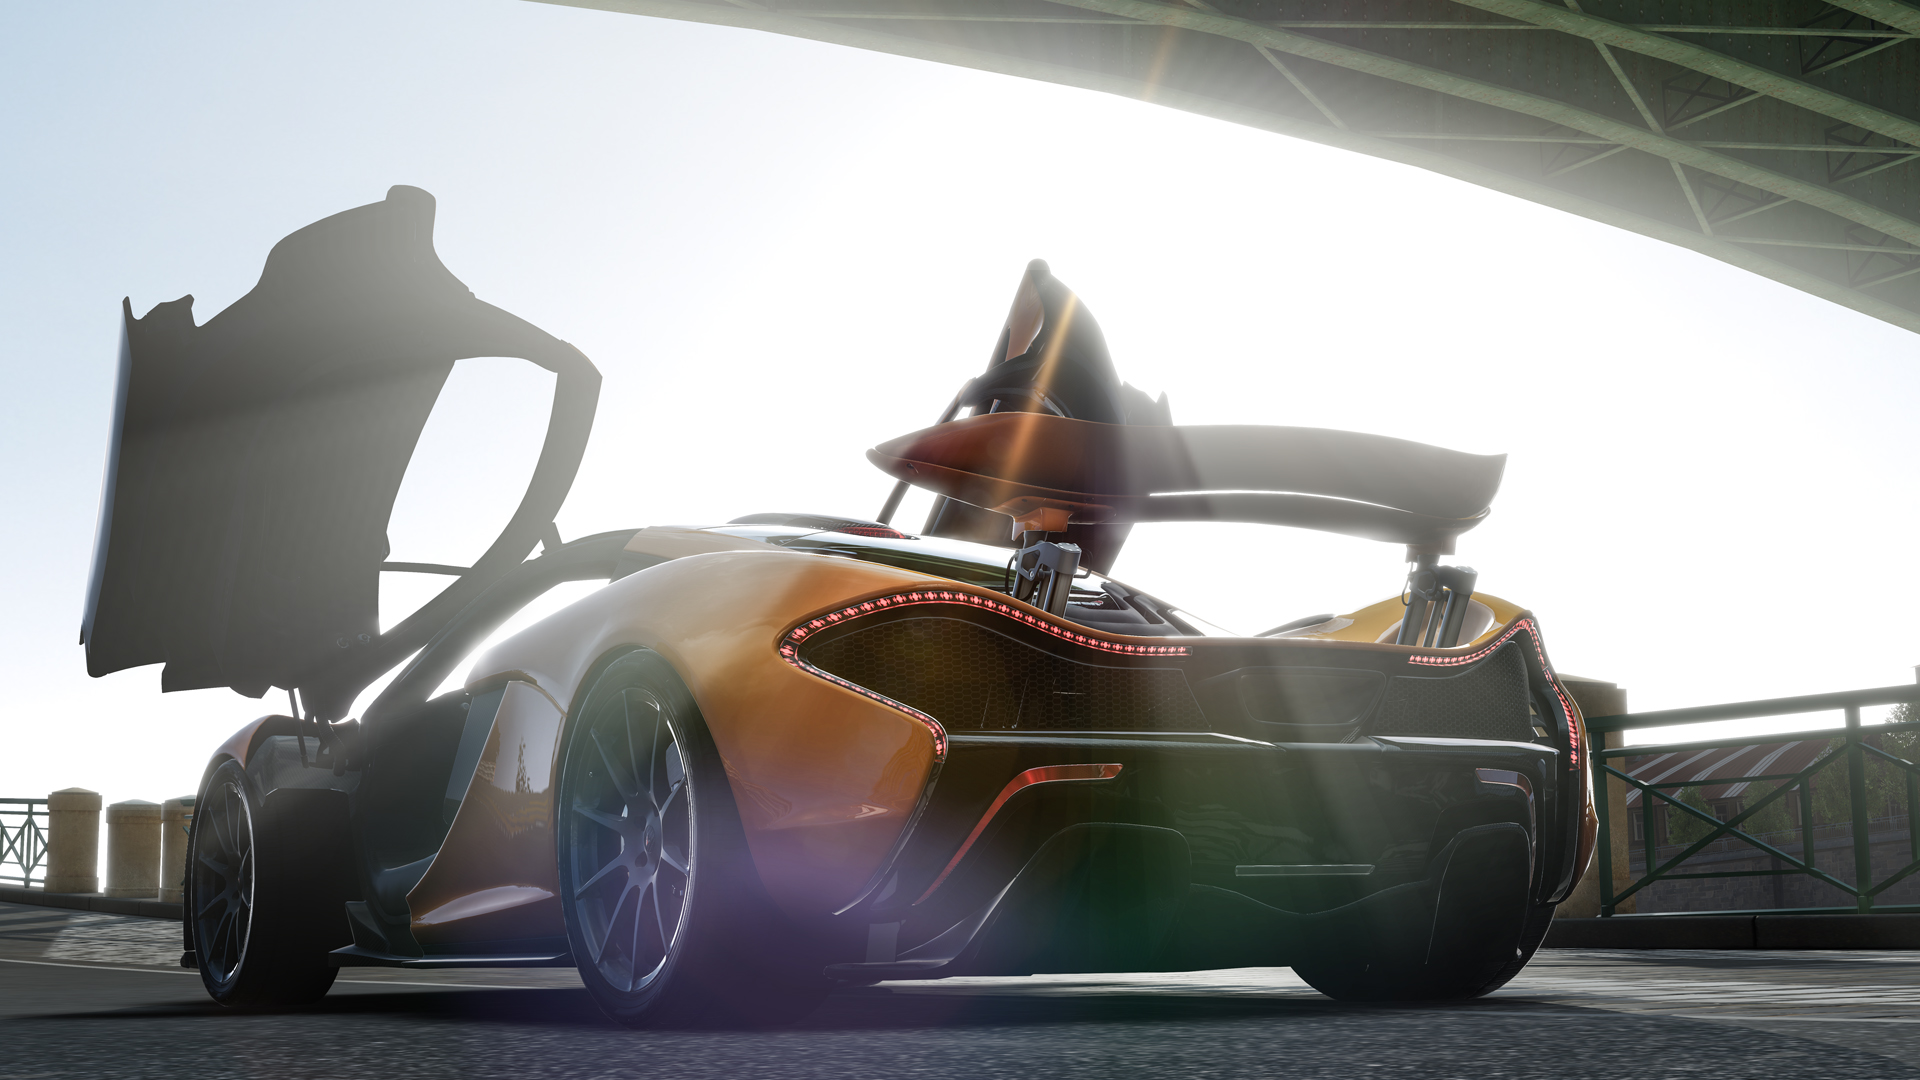 Forza Motorsport 5 screenshots, images and pictures - Giant Bomb